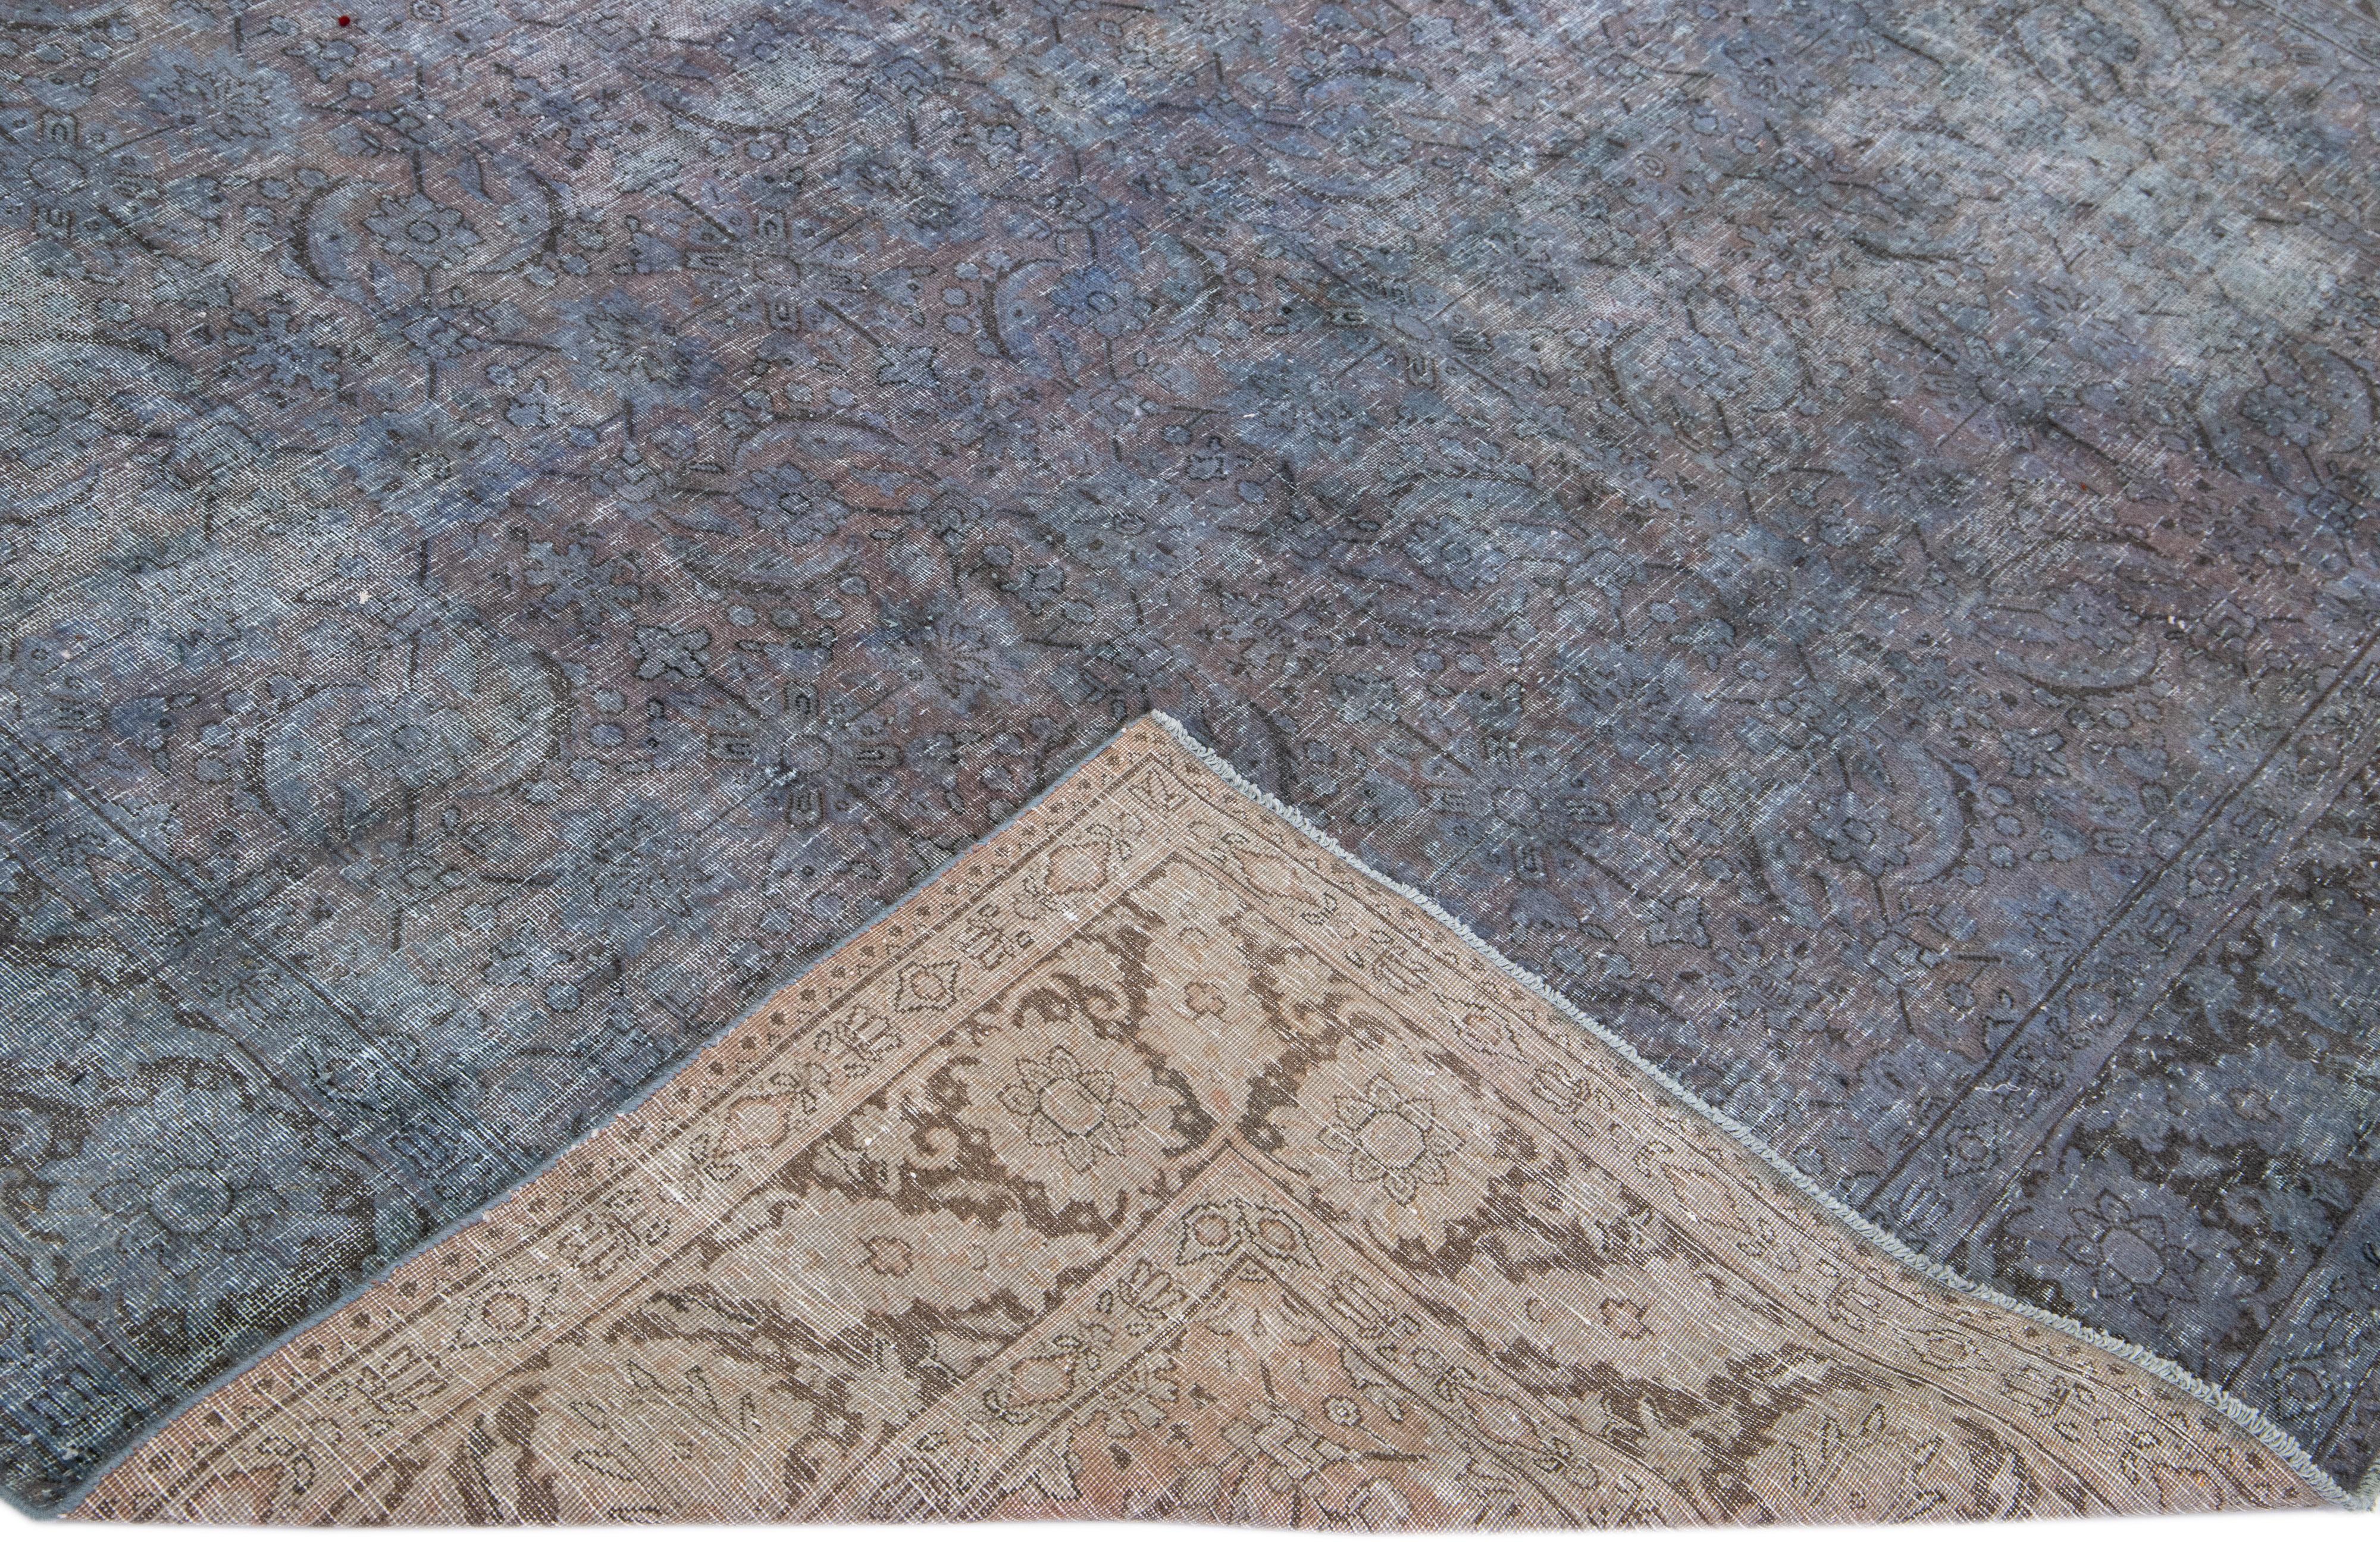 Beautiful Vintage Overdyed hand-knotted wool rug with a blue field. This Persian rug has gray and brown accents in an all-over floral design.

This rug measures: 7'9